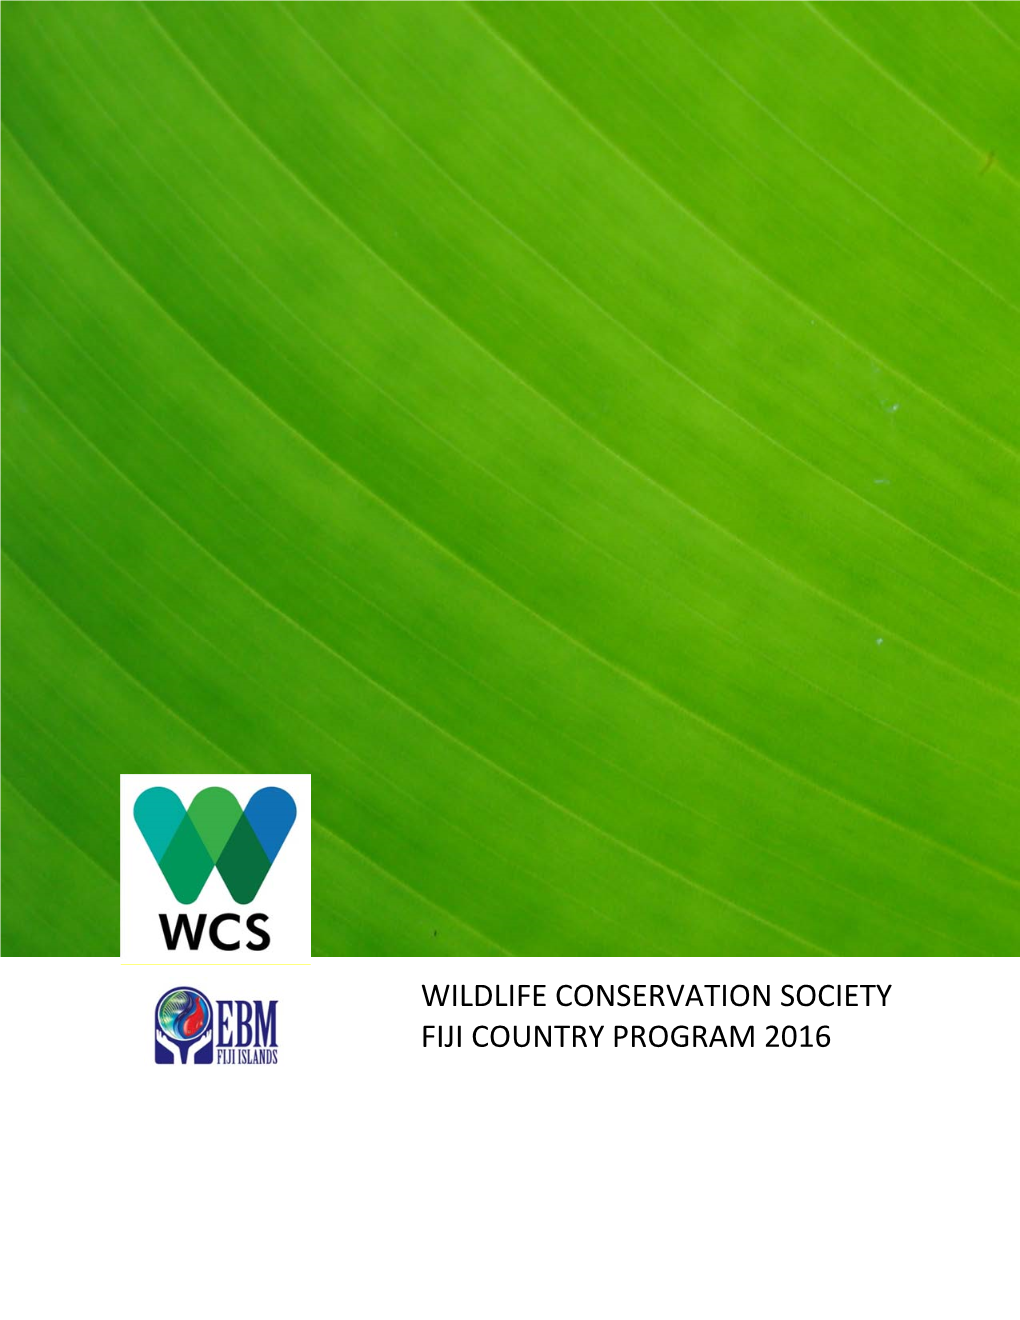 Wildlife Conservation Society Fiji Country Program 2016 from the Director